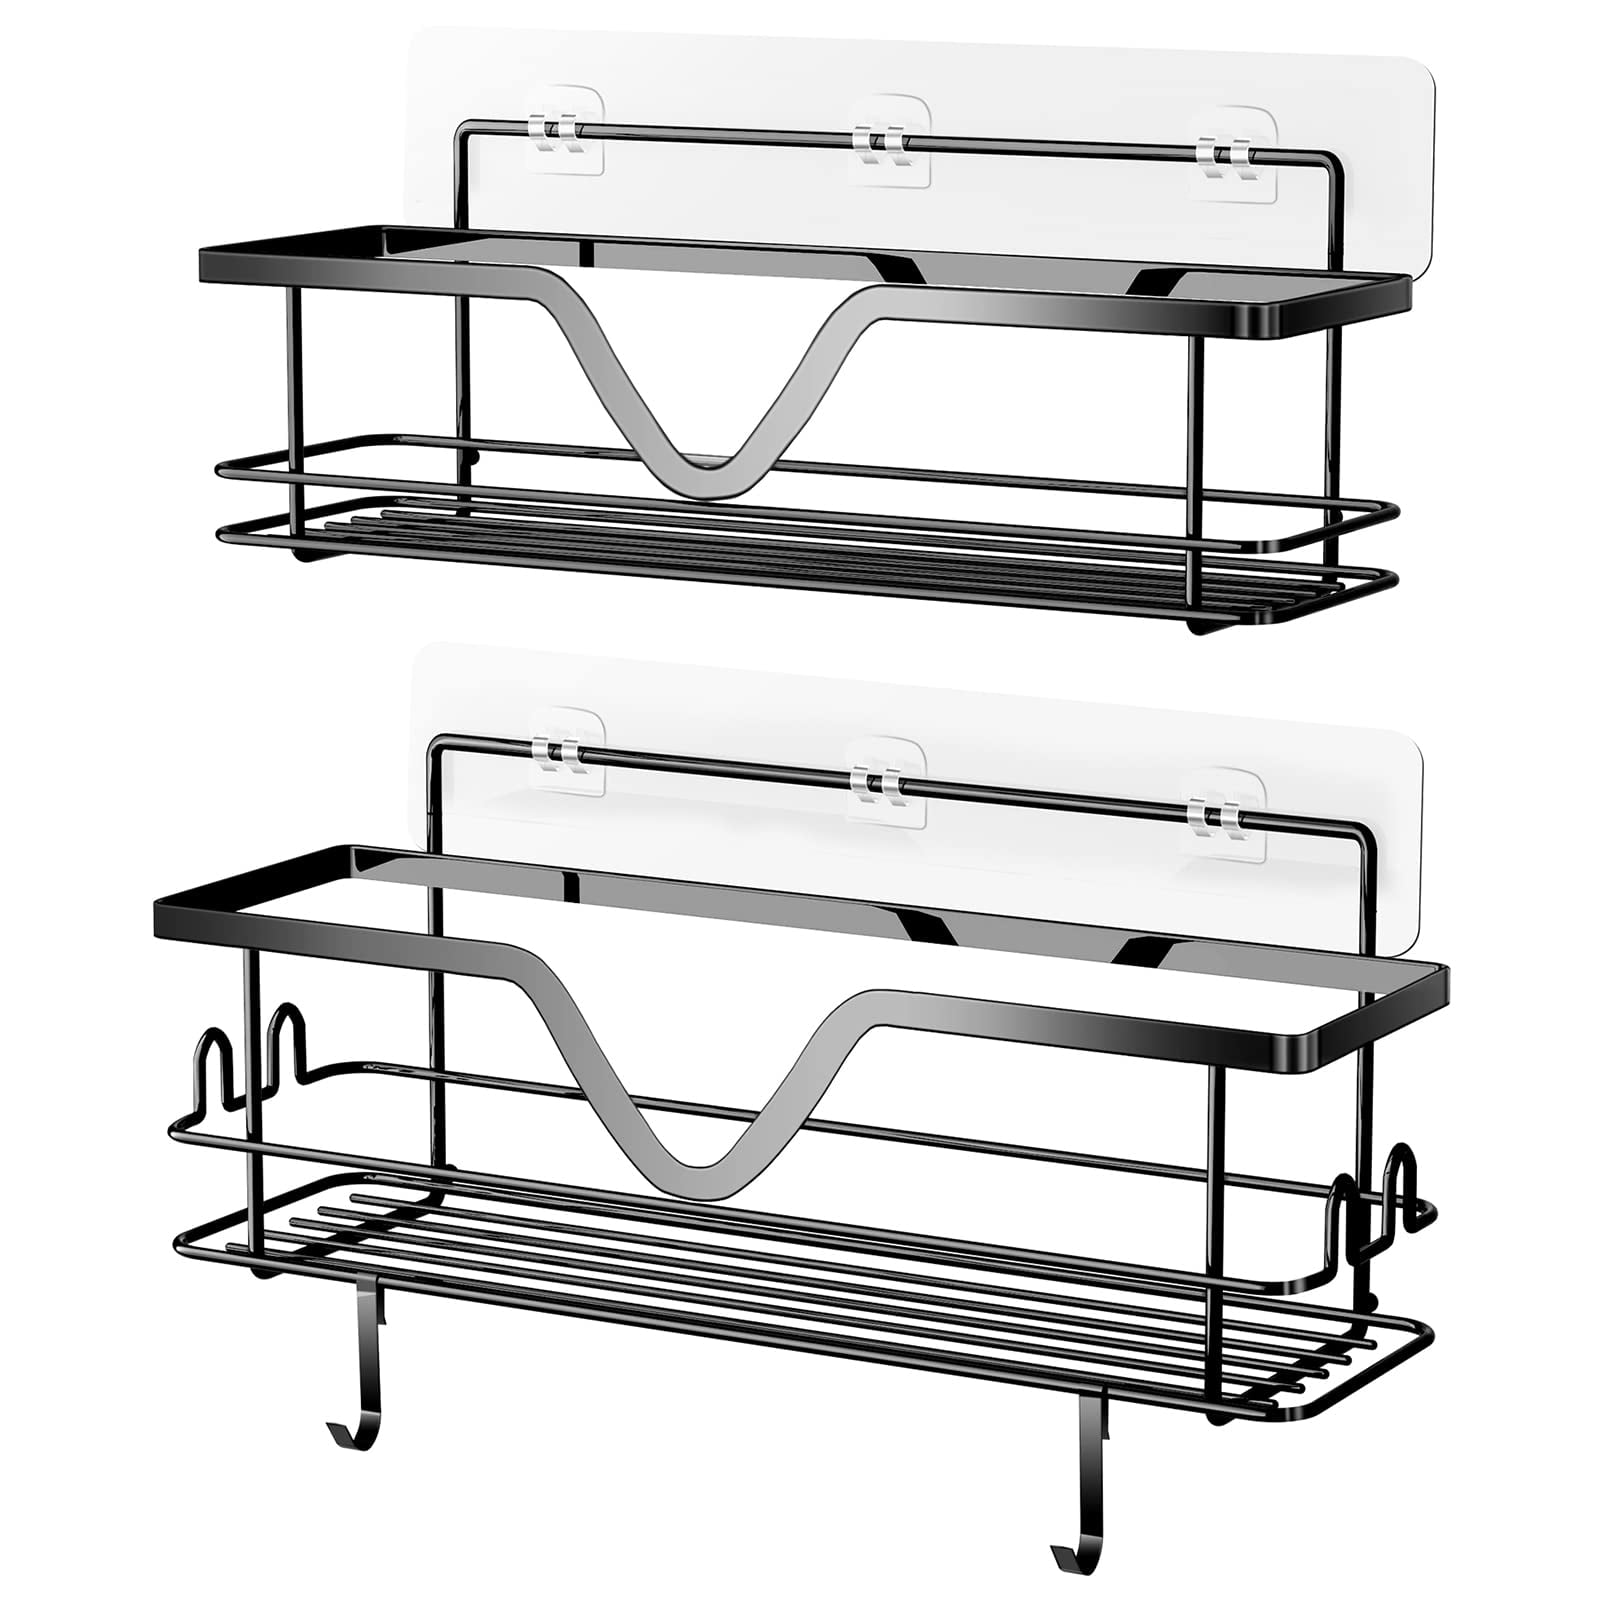 Thideewiz 3 Pack Adhesive Hanging Shower Caddy, Stainless Steel Bathroom  Shower Organizer, Polished Silver Shower Shelves, Rustproof Shower Racks  with